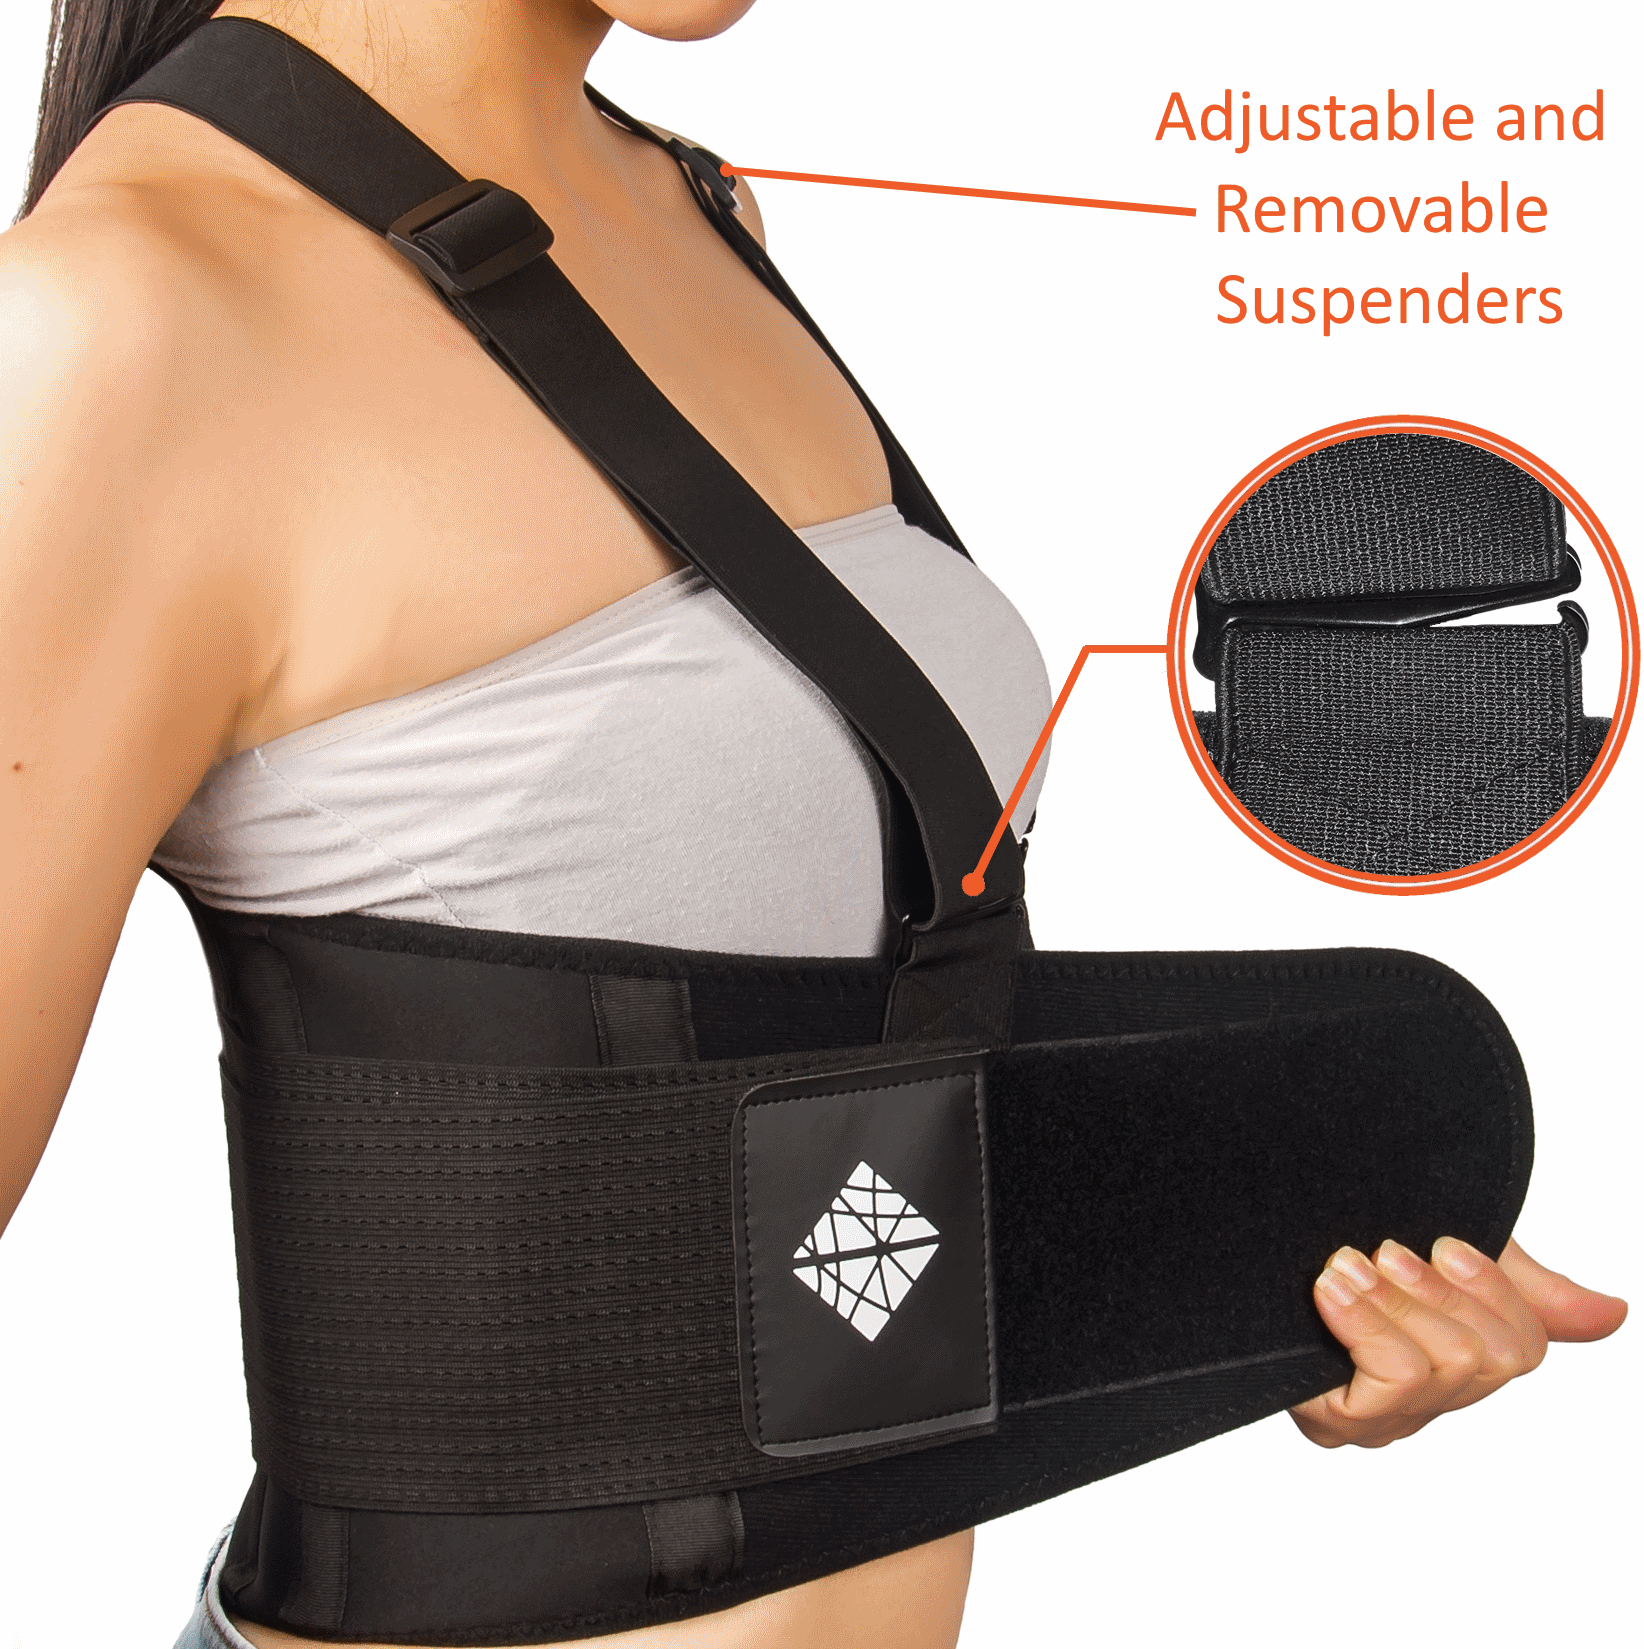 Lower Back Brace with Suspenders in PLUS SIZE - NeoHealth